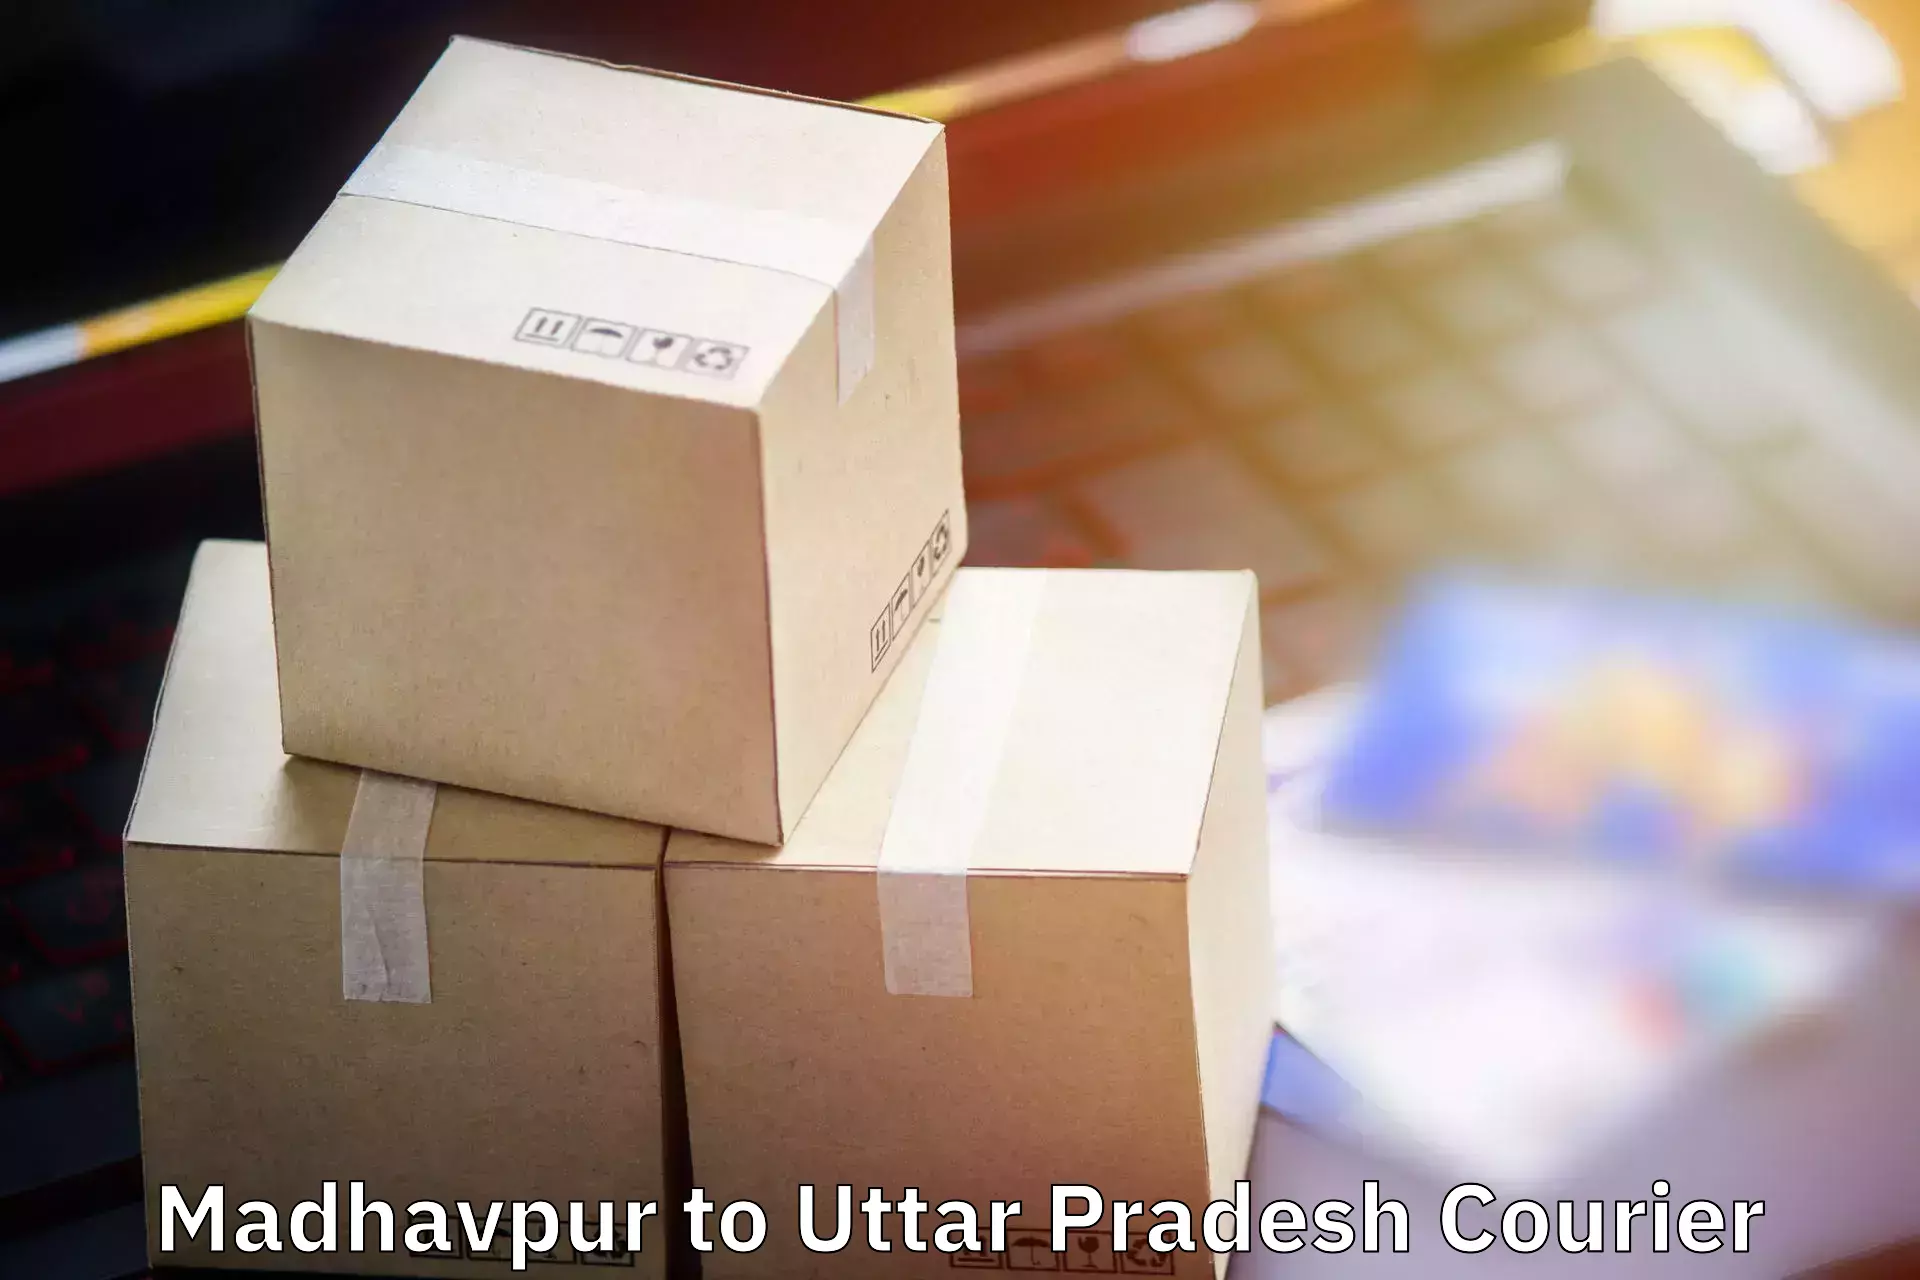 Baggage delivery technology Madhavpur to Fatehgarh